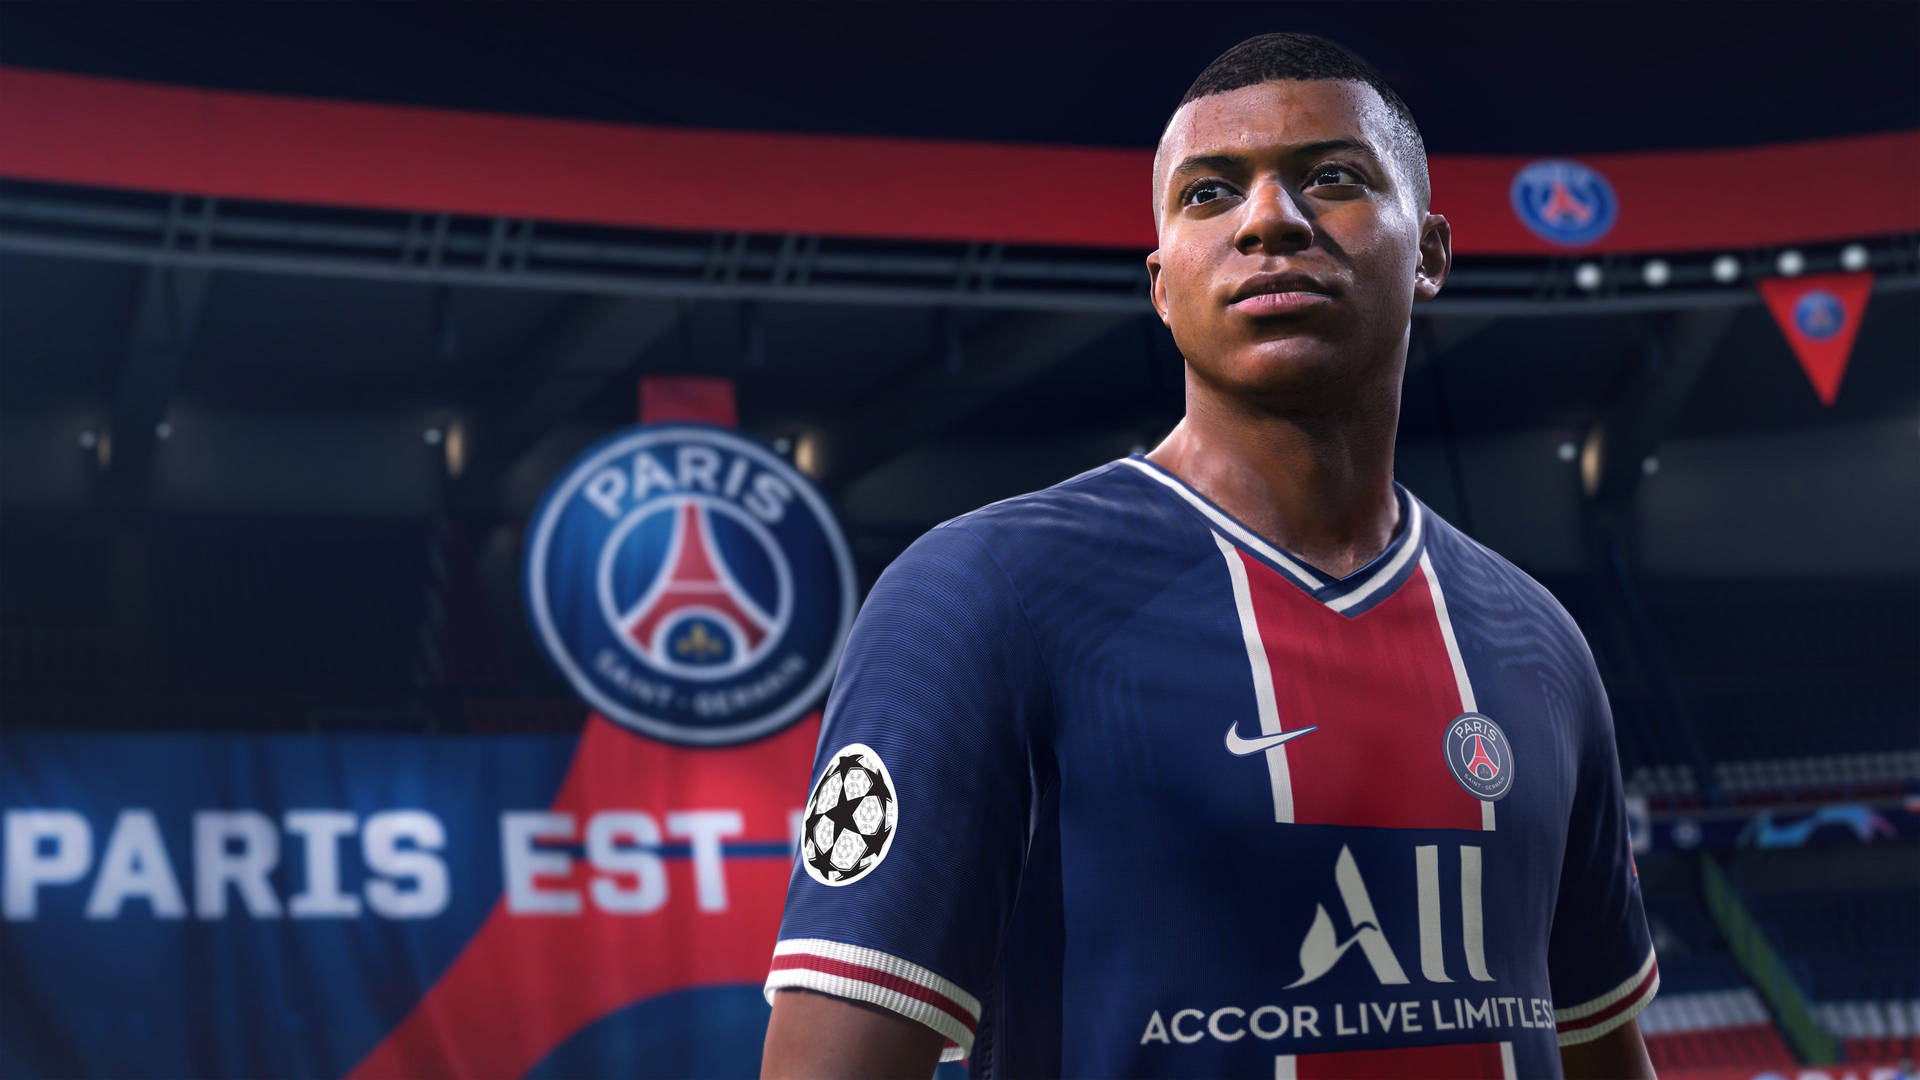 Fifa 21 Ea Sports Character Of Kylian Mbappé Background